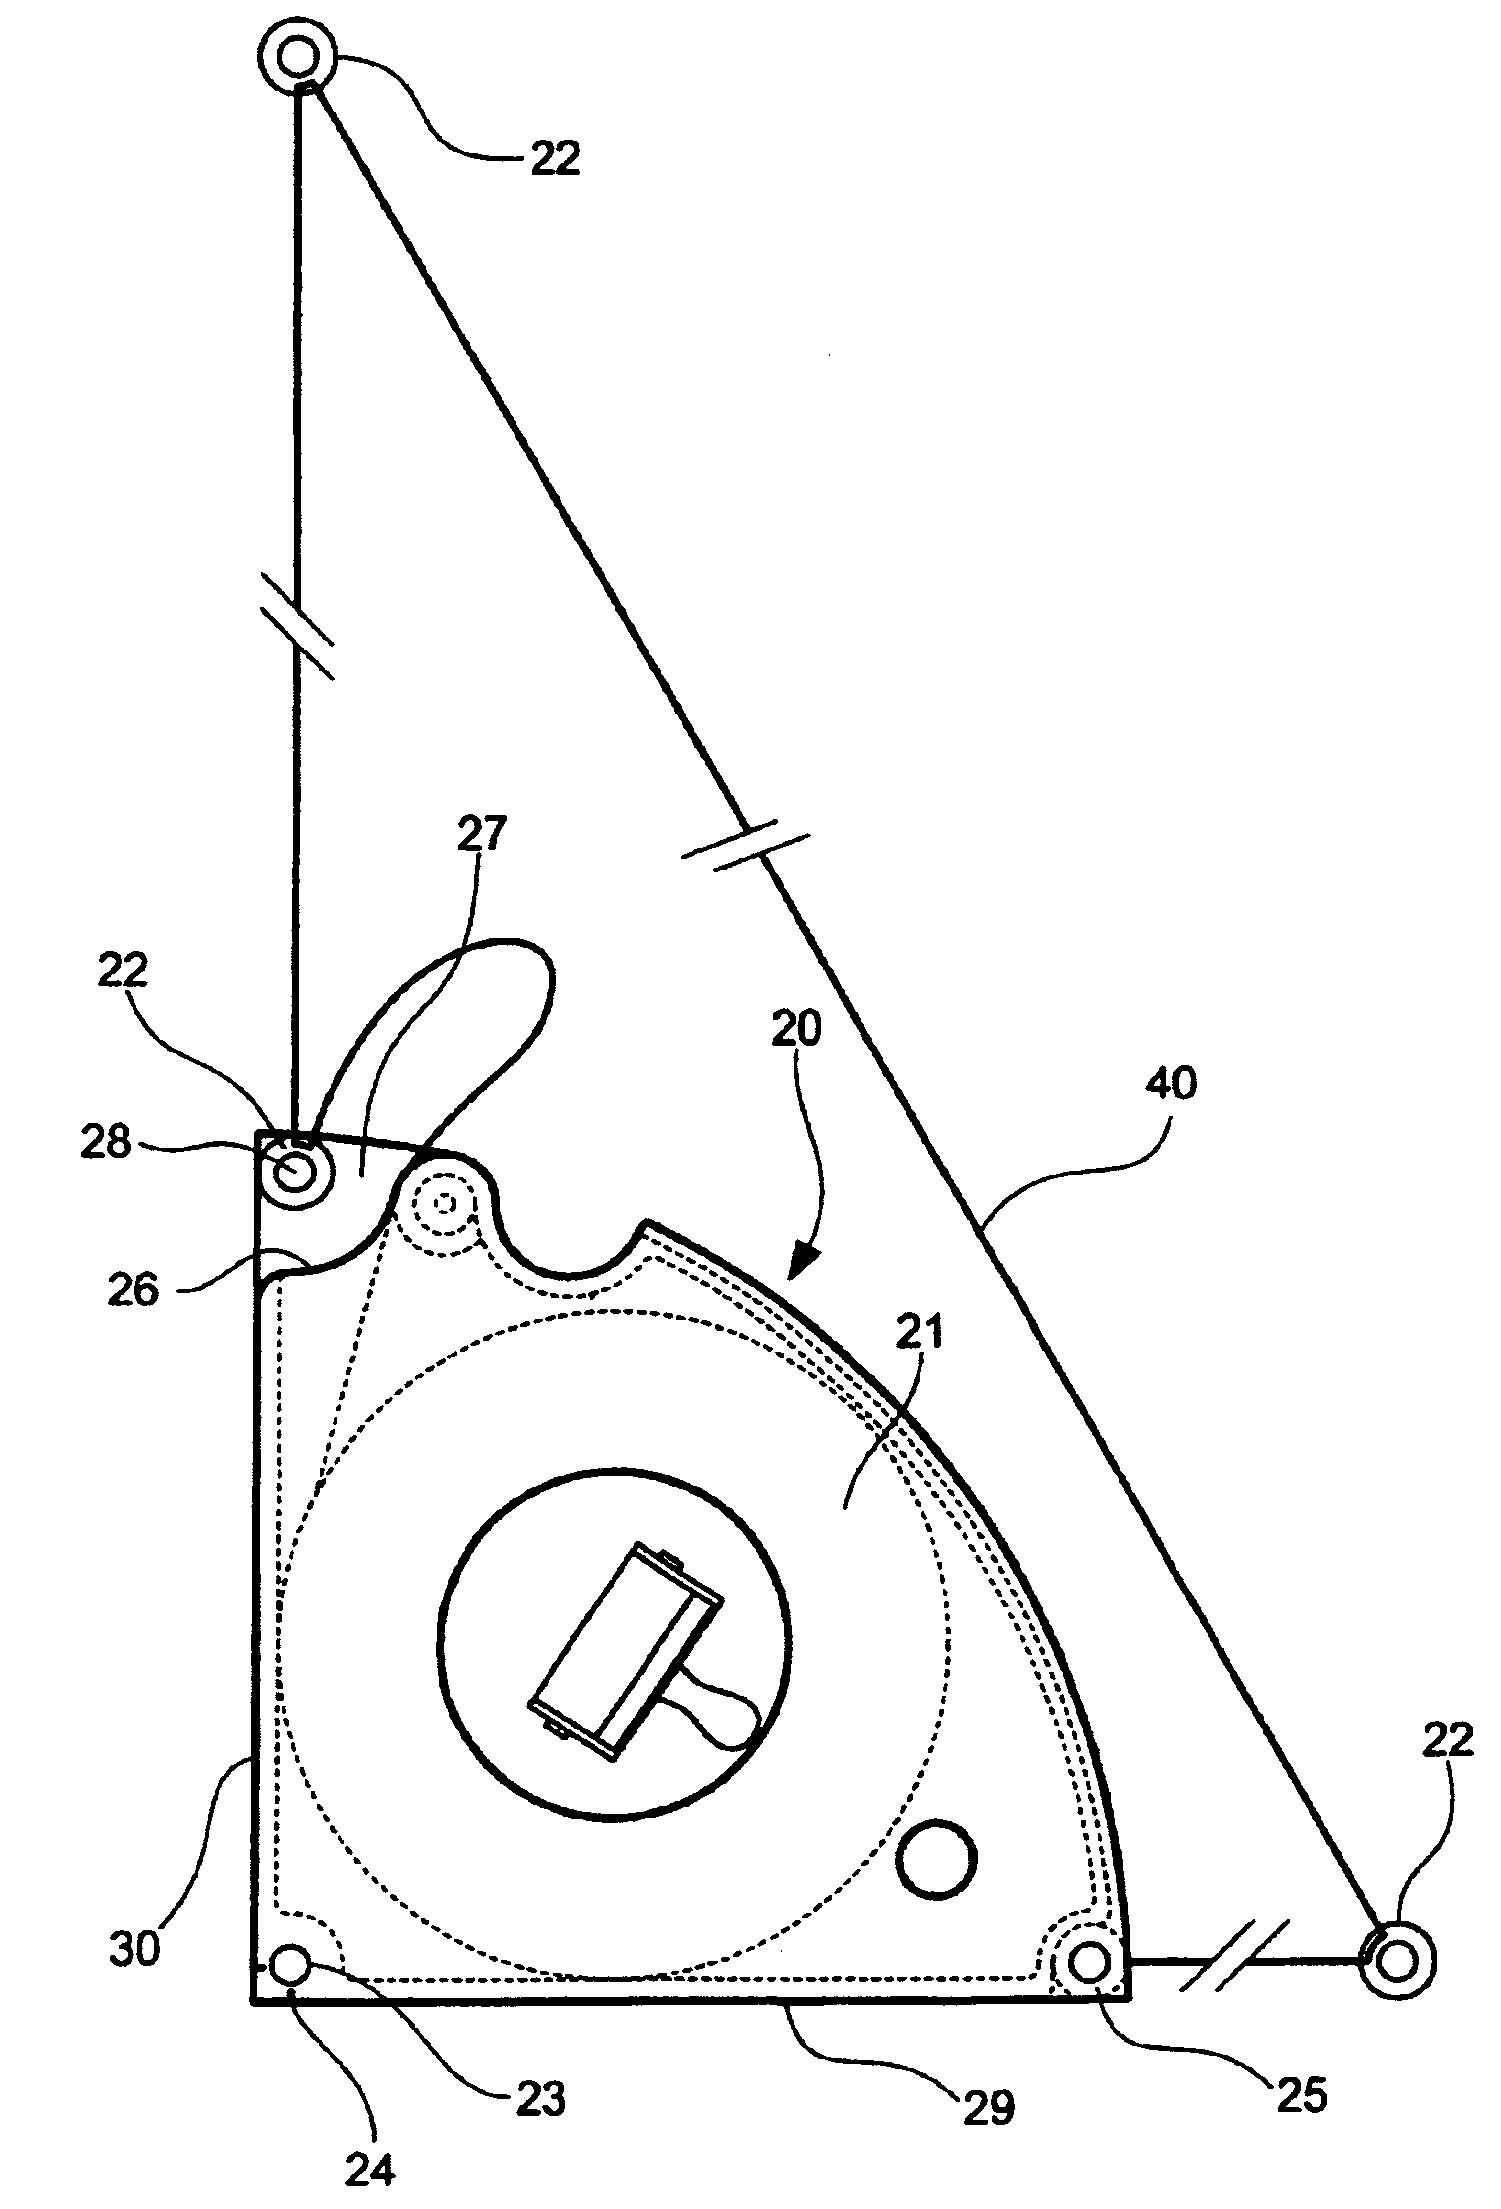 Right angle measuring device